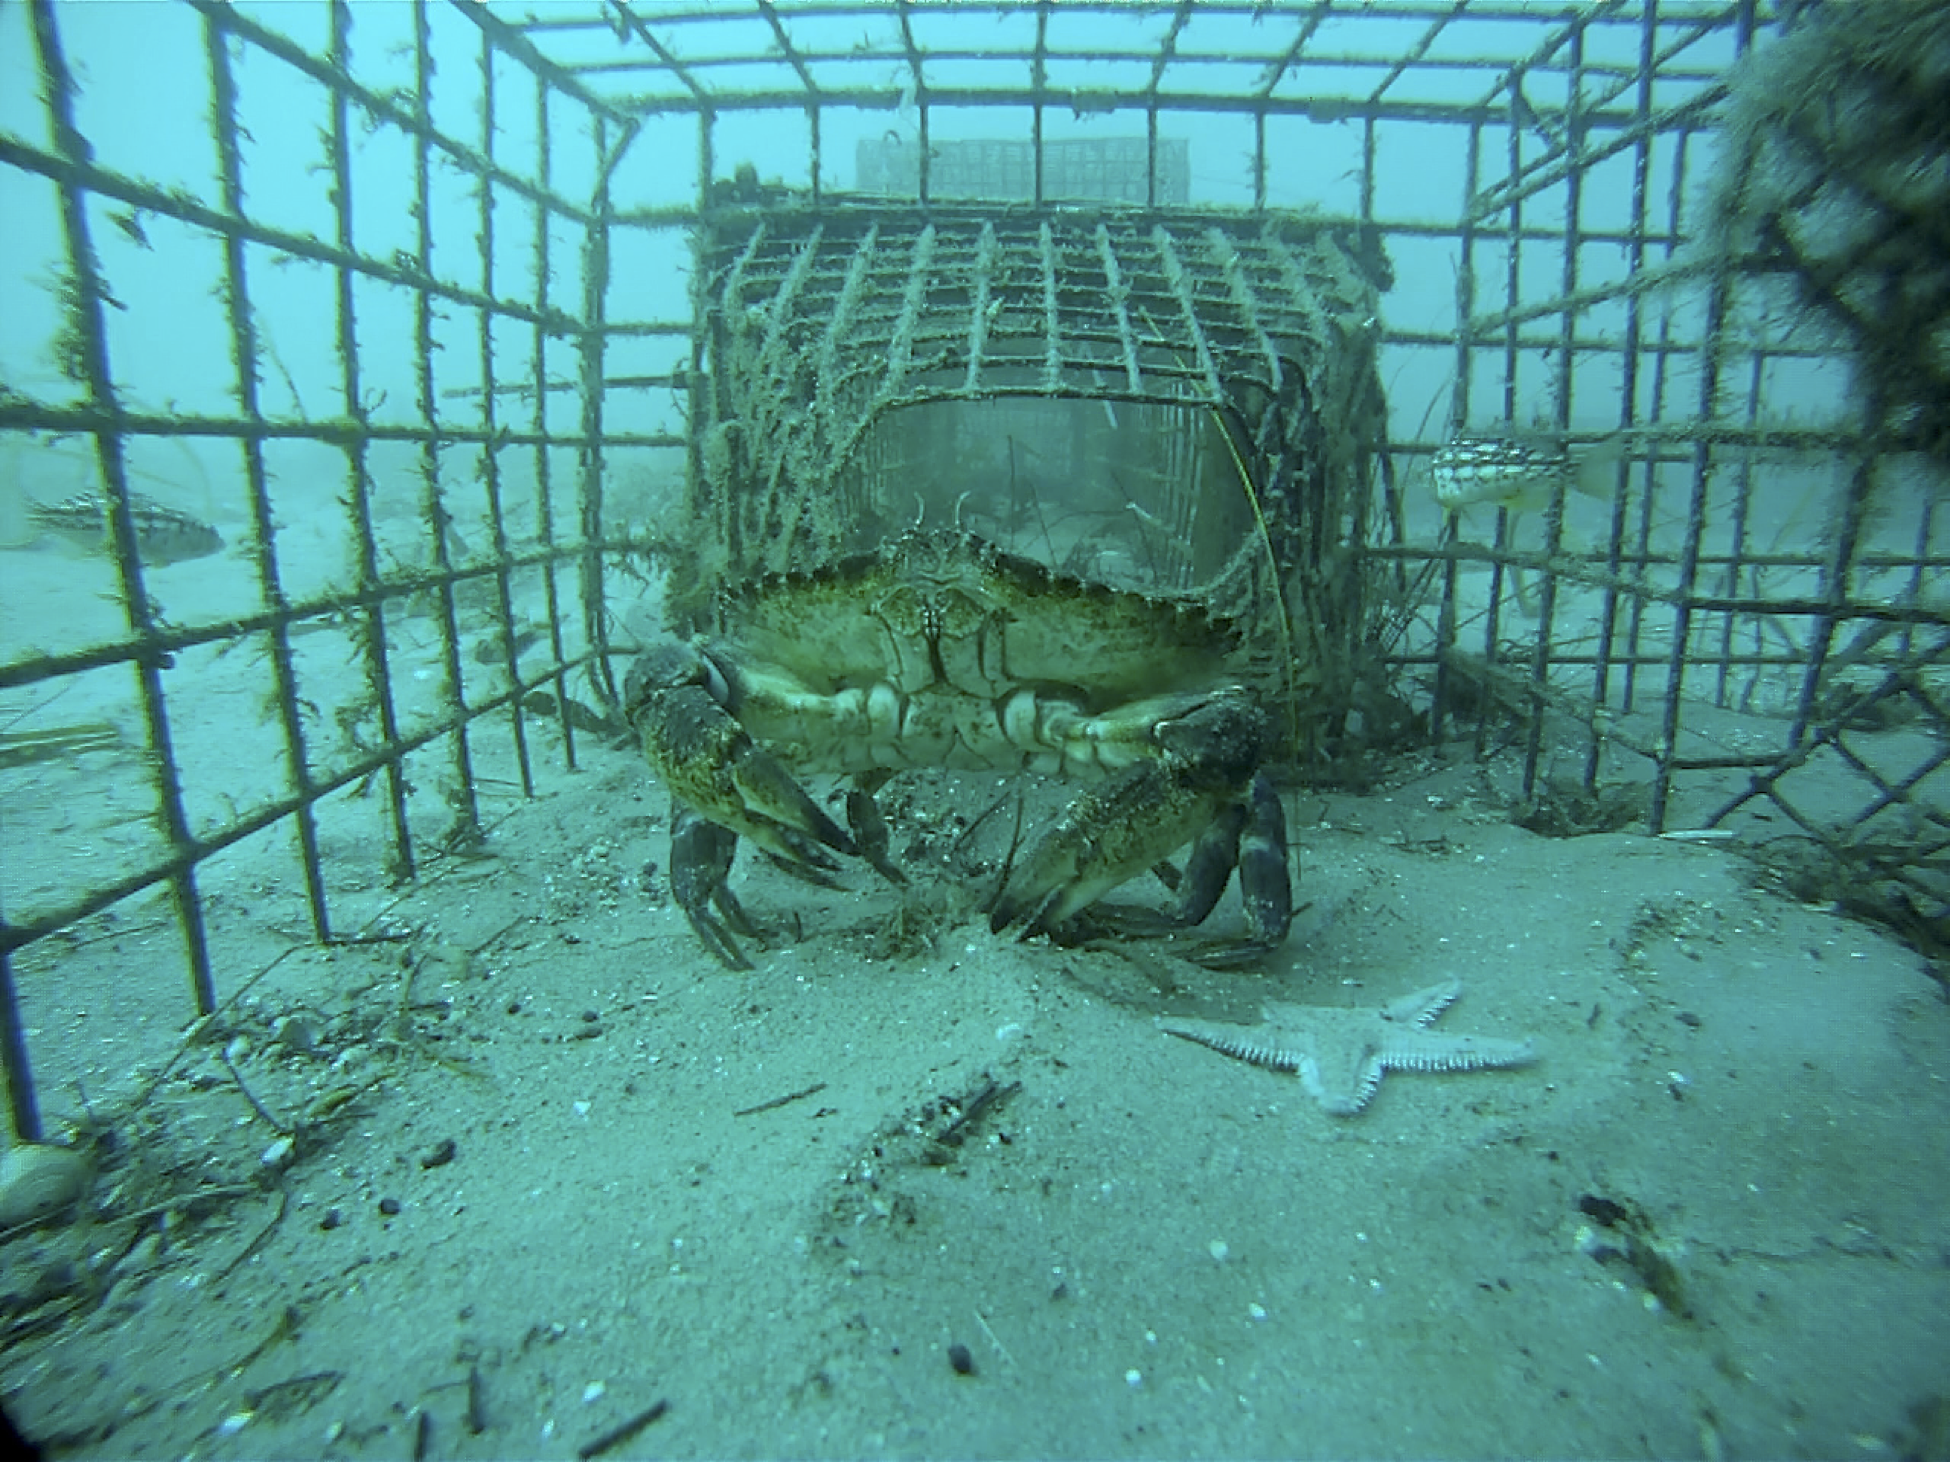 Splash page image of a crab in a crab trap.